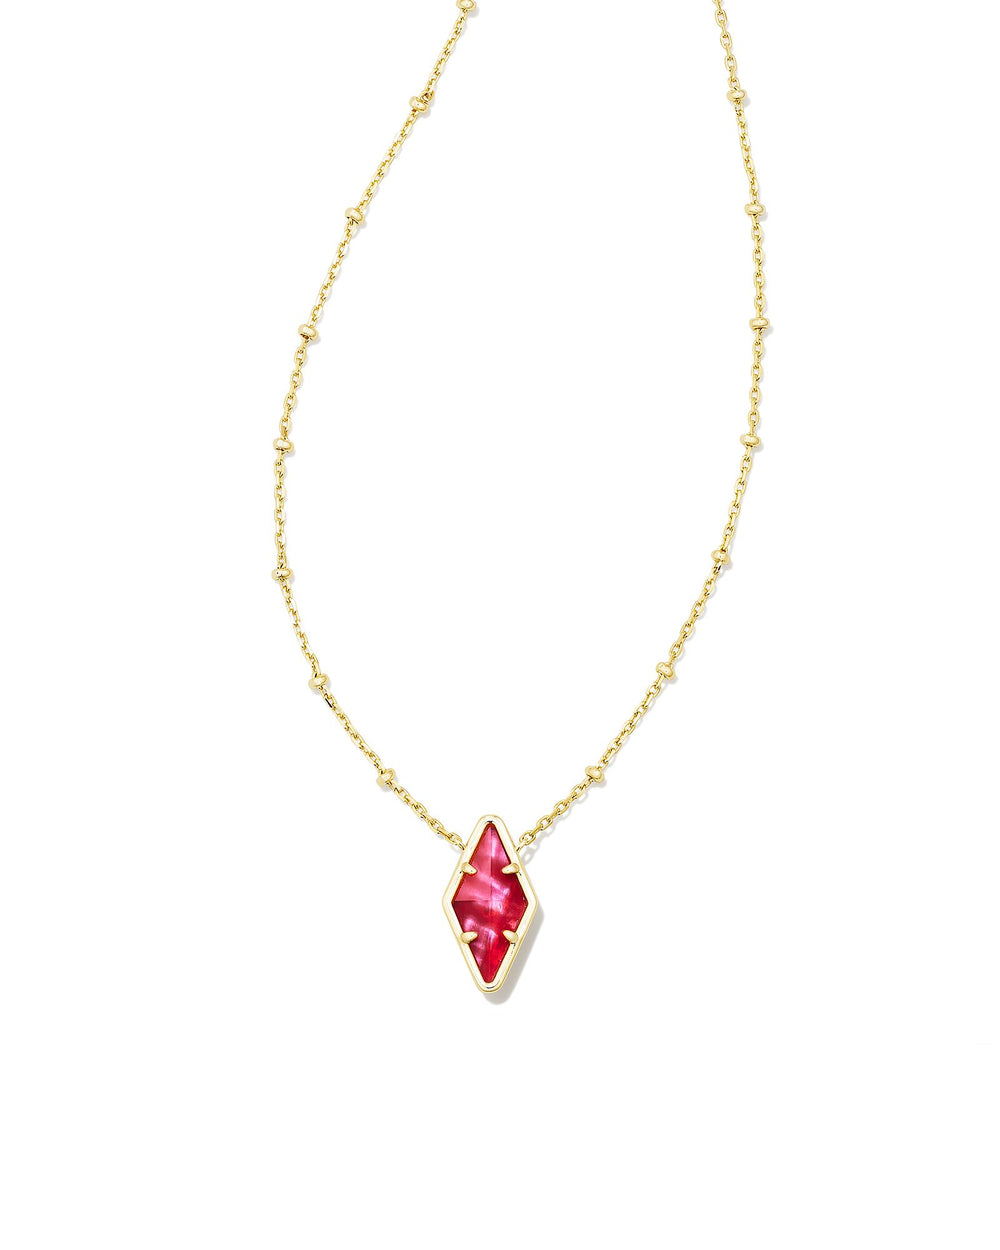 Kinsley Necklace Gold in Raspberry Illusion